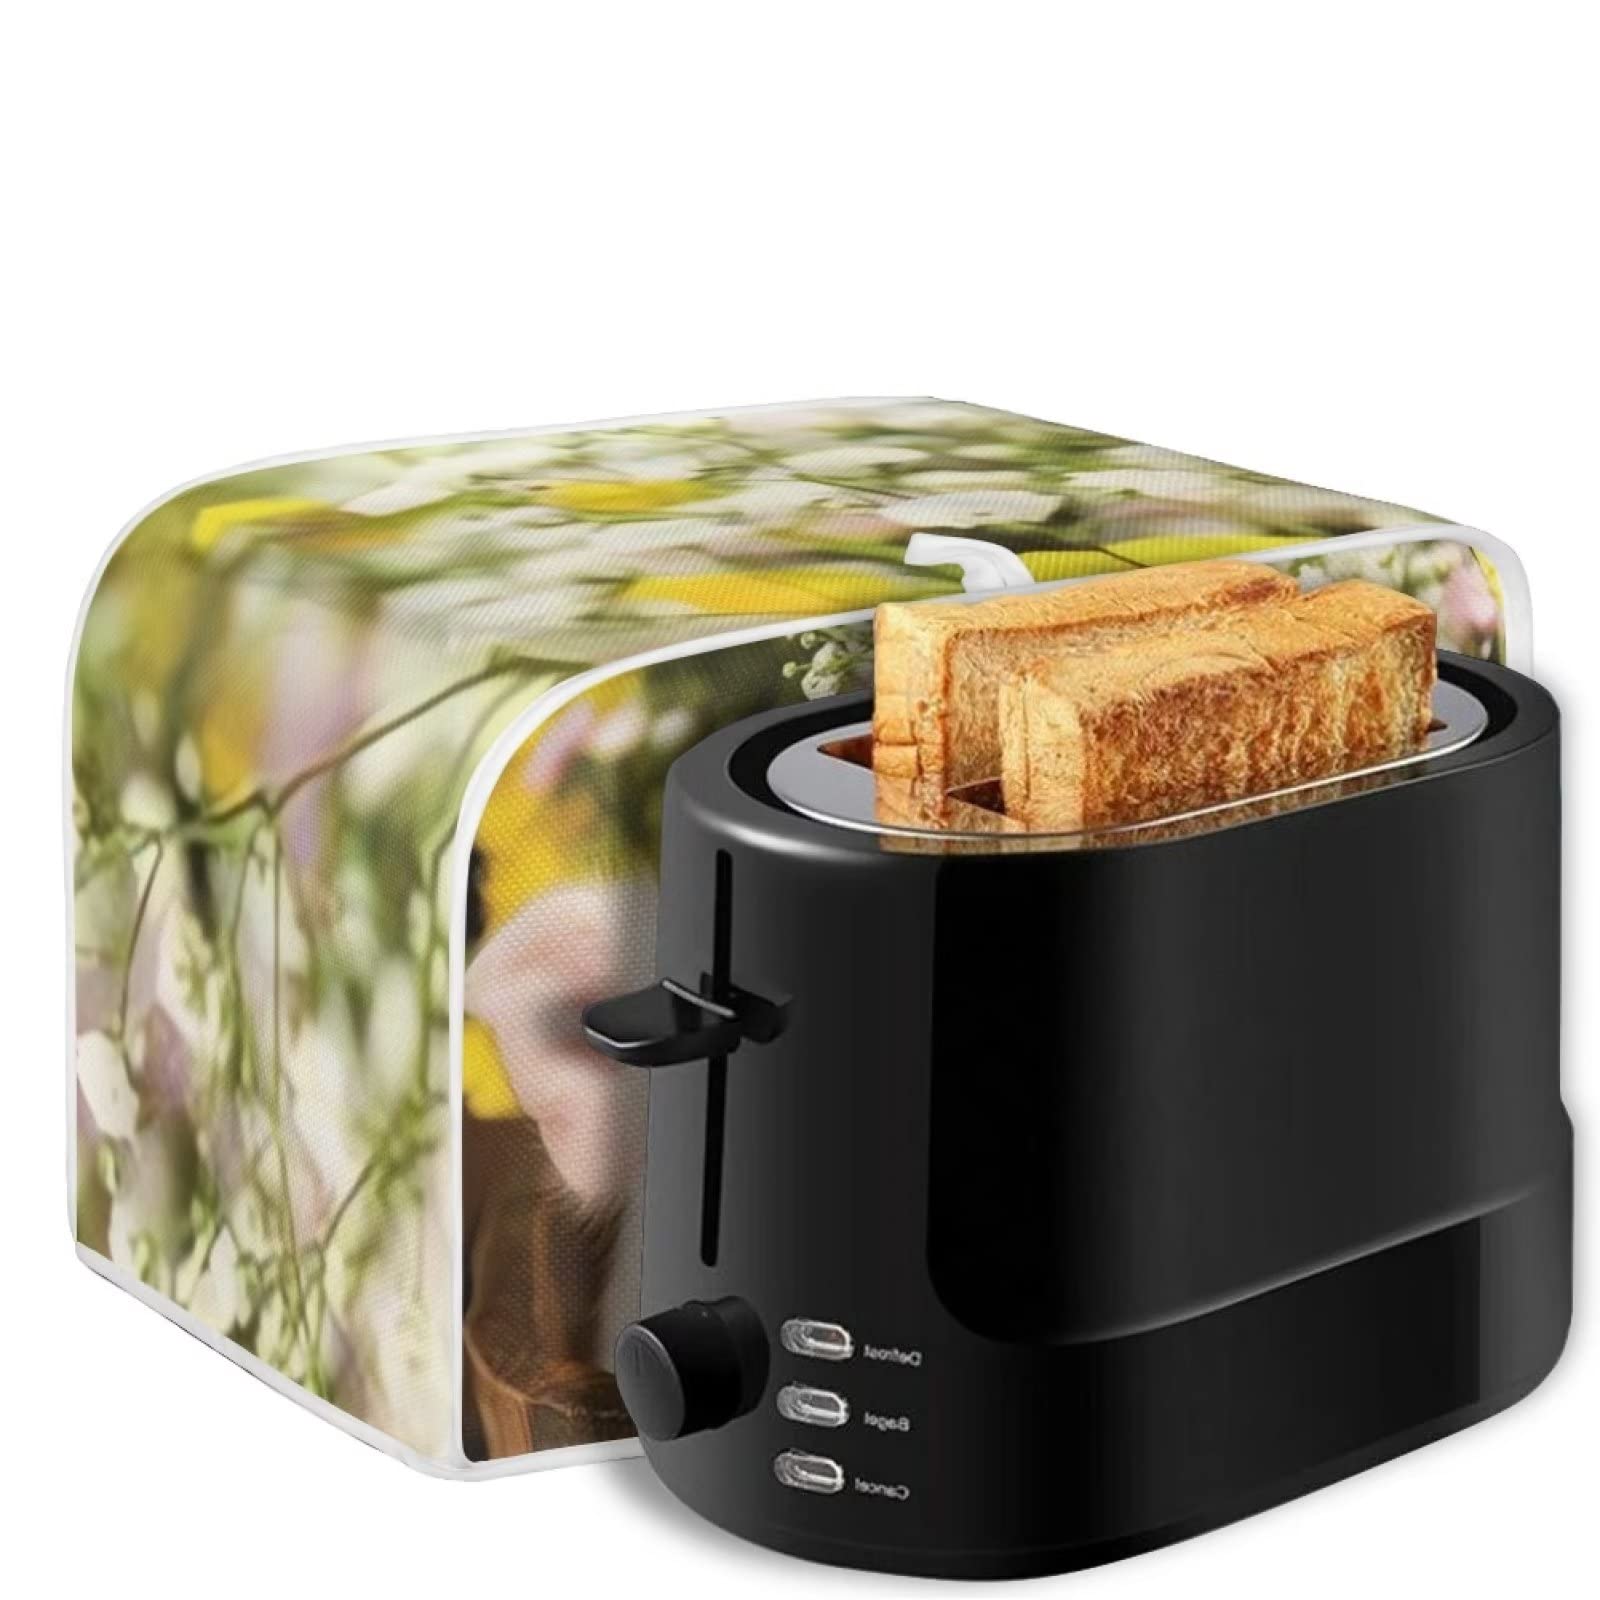 Buybai Kitchen Toaster Covers 2 Slice Wide Slot Cute 3D Pig Pattern Small Appliance Covers Dustproof Bread Maker Covers